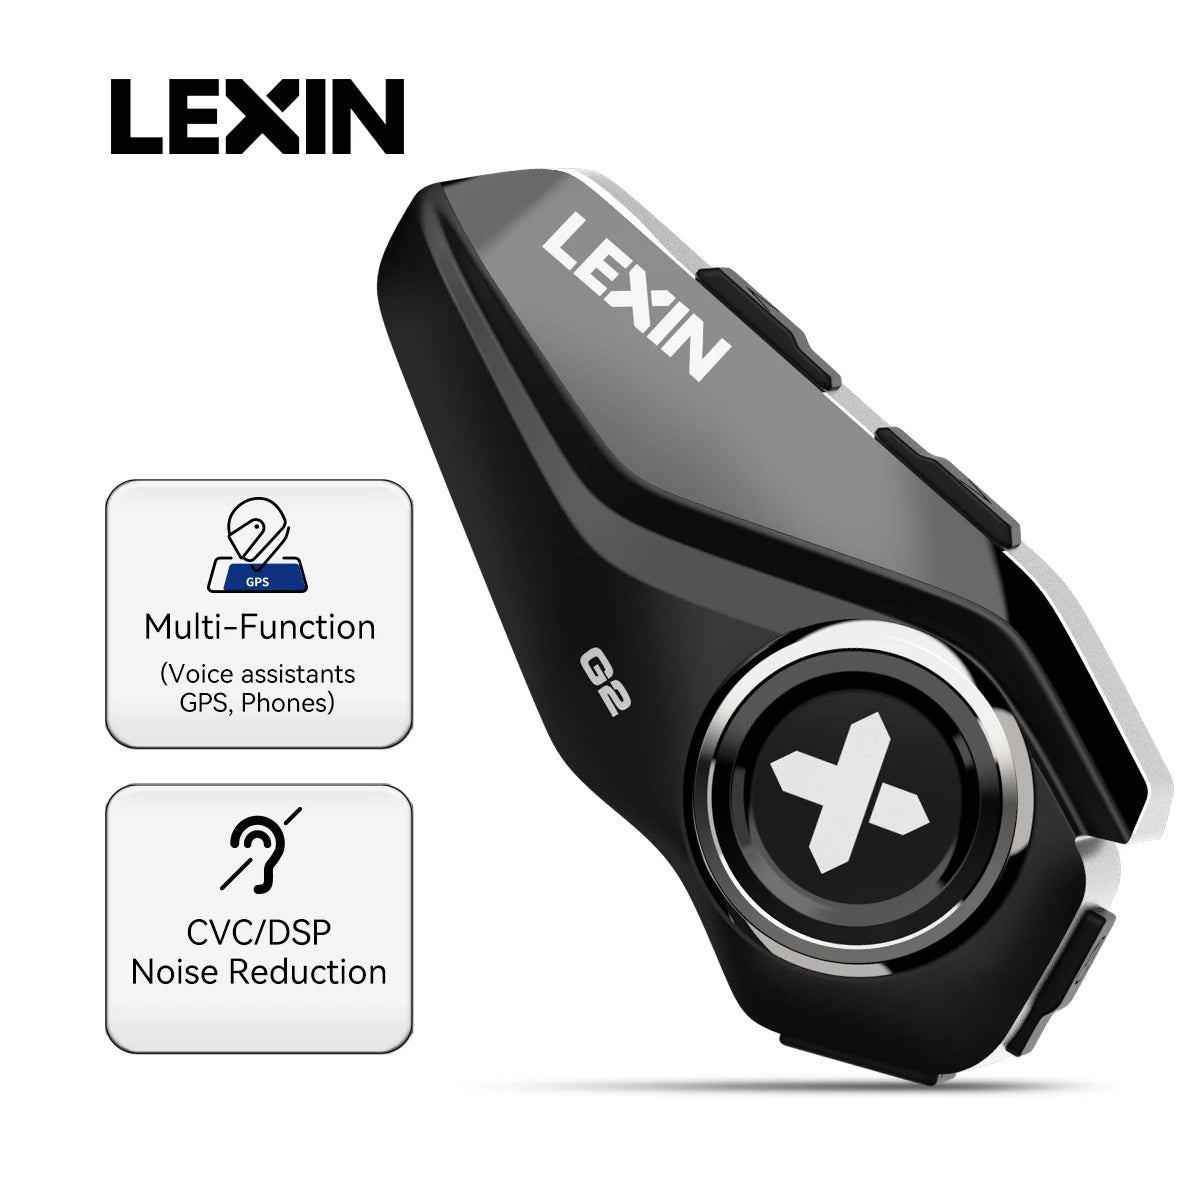 LEXIN Motorcycle Intercom Bluetooth Helmet Headsets Big Button Design &Up To Pair 6 Riders,Exchangeable Pattern Shell ,DSP - Atom Motors